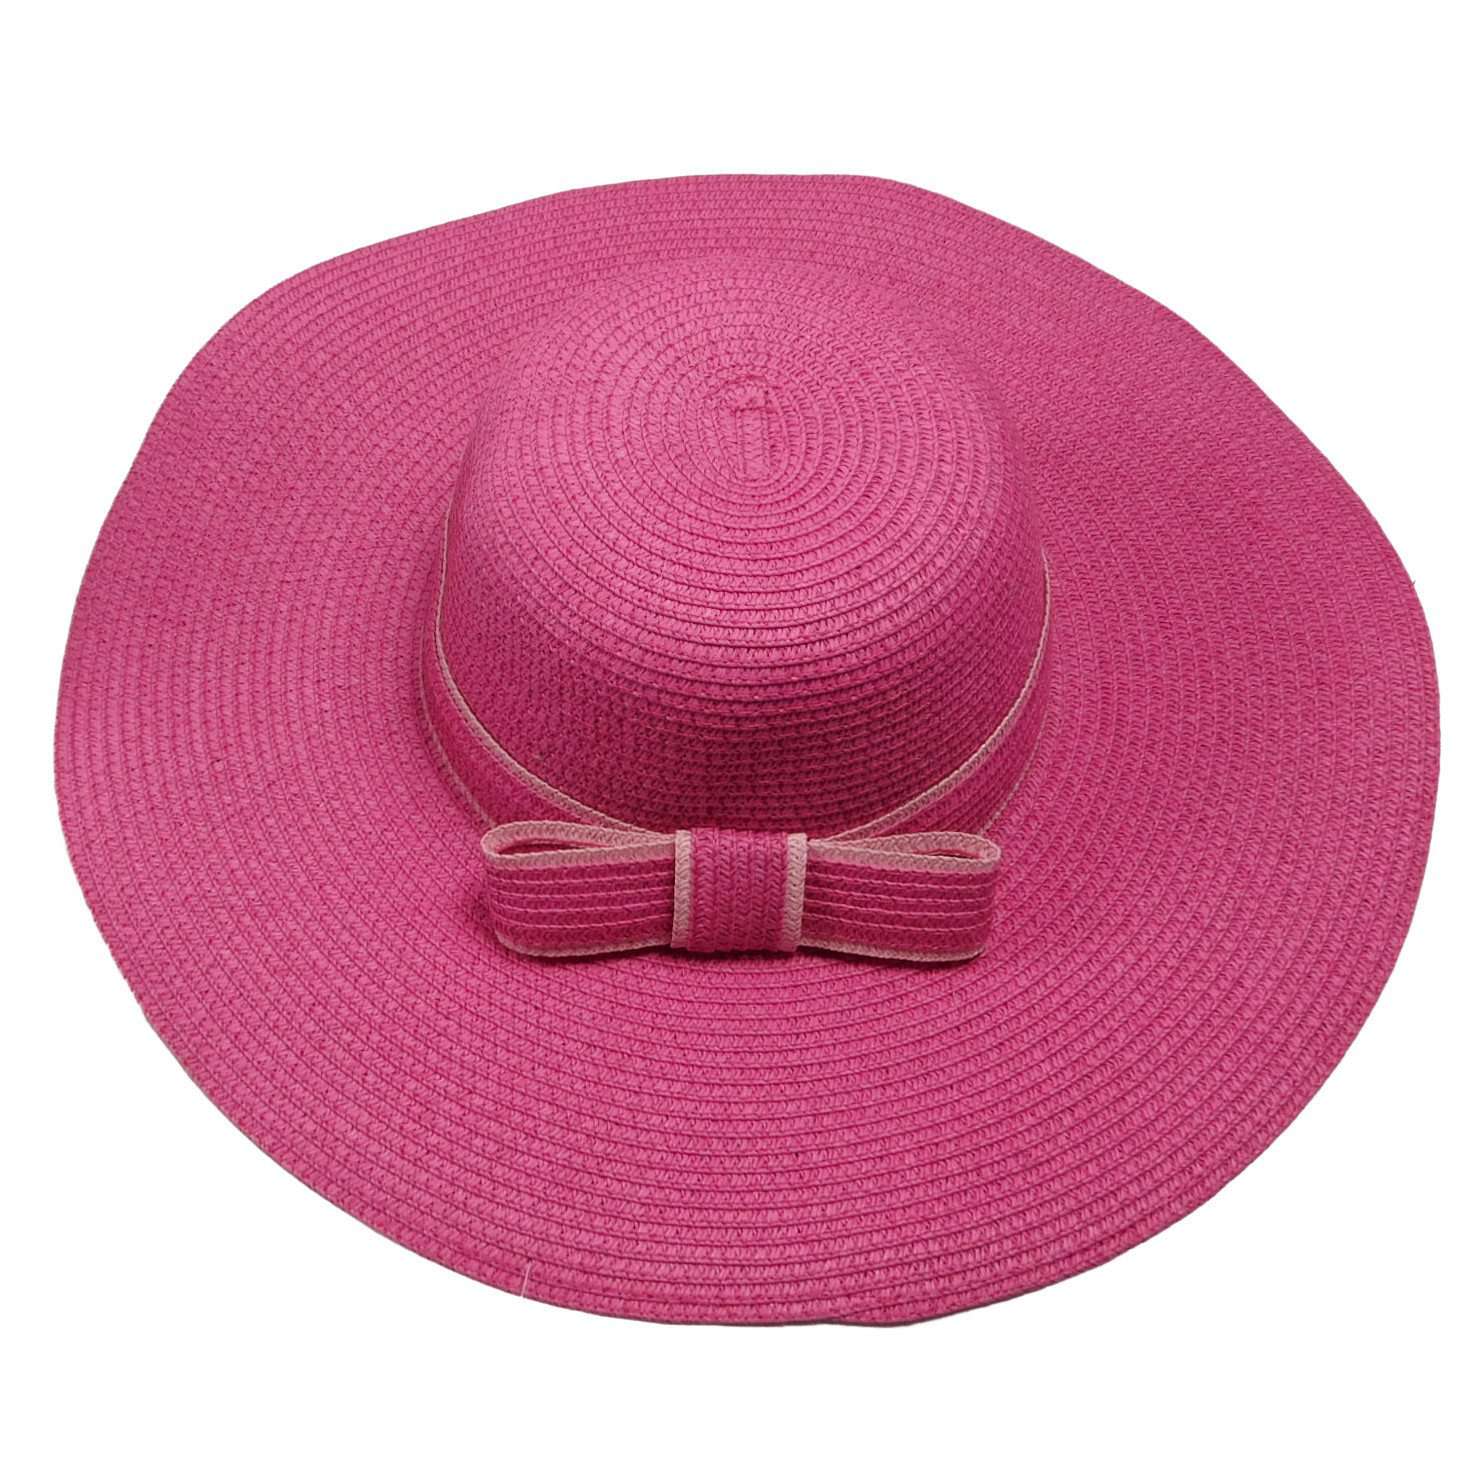 Sun Hat with Bow Detail Floppy Hat Something Special LA WSPS475FC Fuchsia  